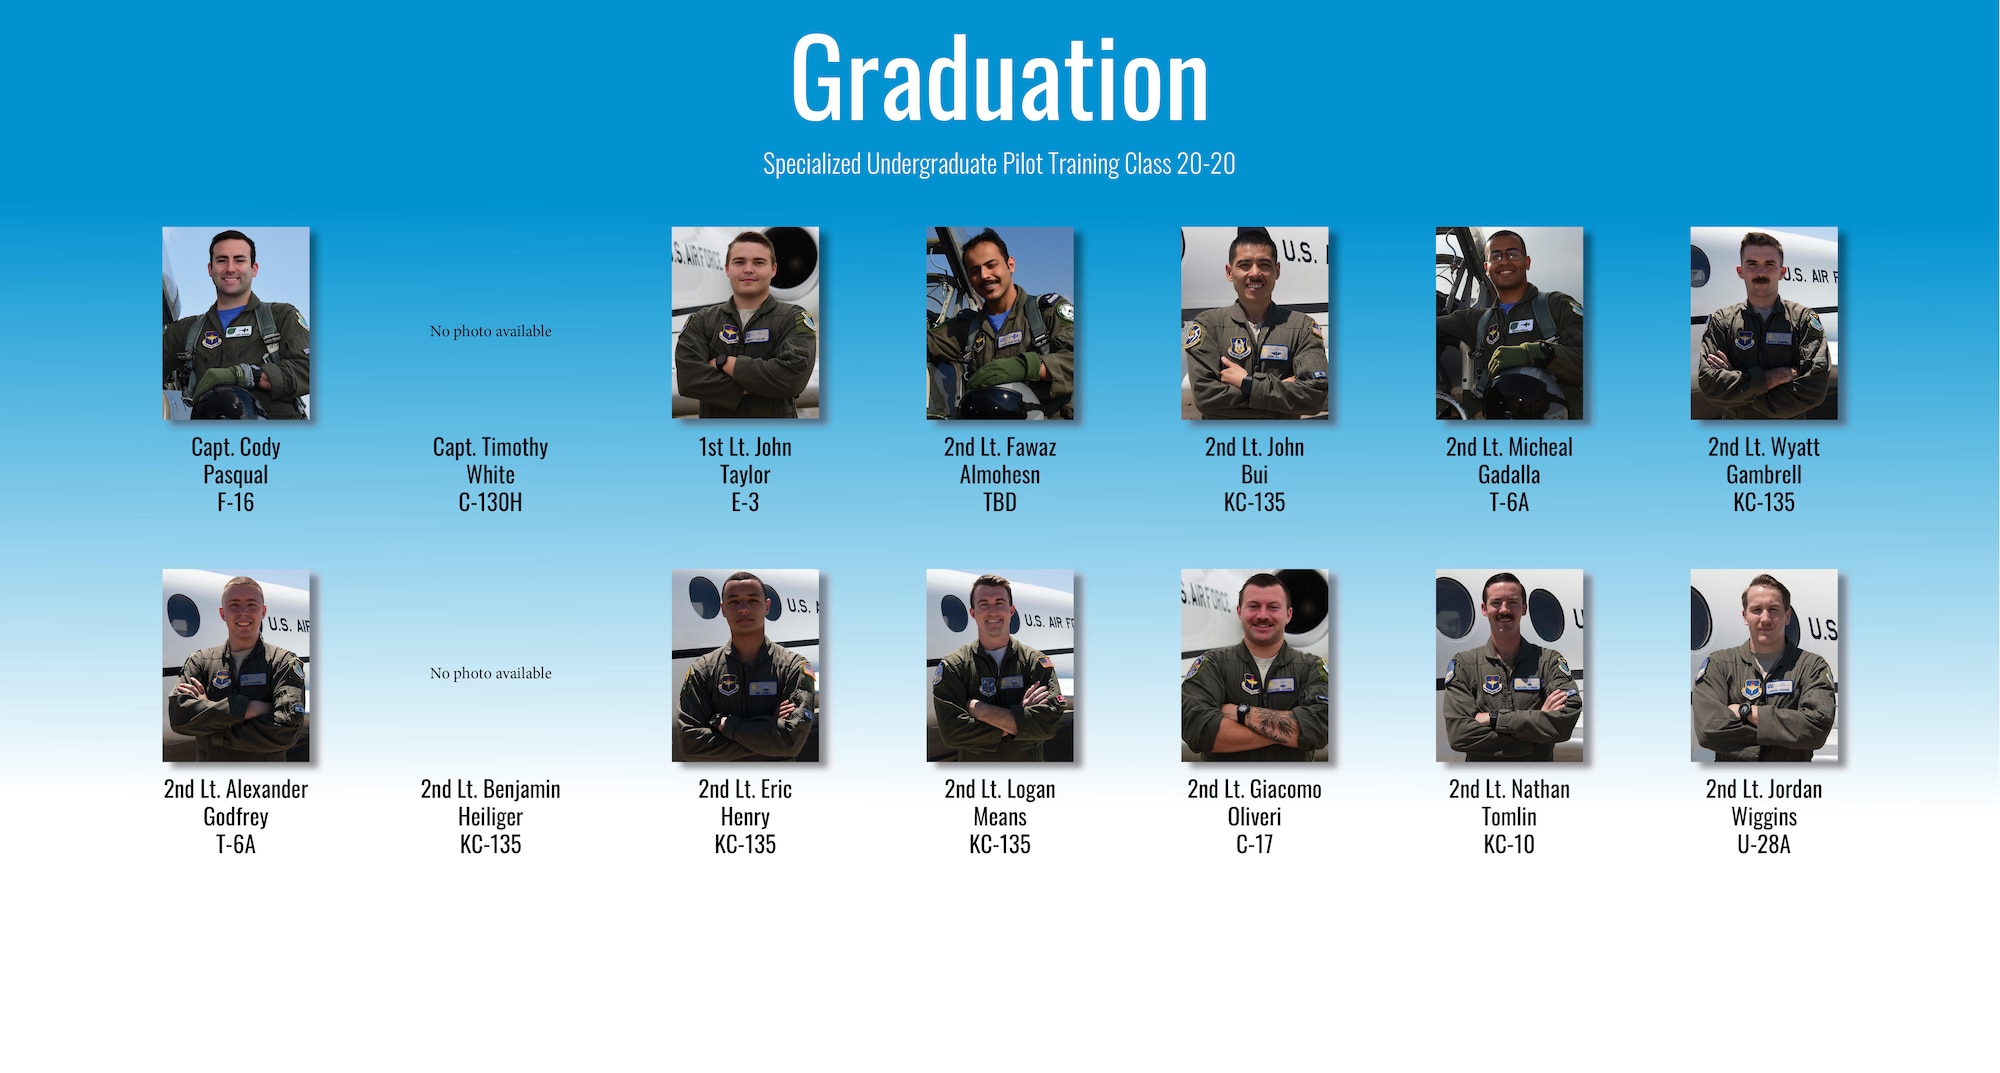 Specialized Undergraduate Pilot Training Class 20-20 and 20-21 are set to graduate after 52 weeks of training at Laughlin Air Force Base, Texas, Aug. 8, 2020. Laughlin is the home of the 47th Flying Training Wing, whose mission is to build combat-ready Airmen, leaders and pilots. (U.S. Air Force graphic by Senior Airman Marco A. Gomez)